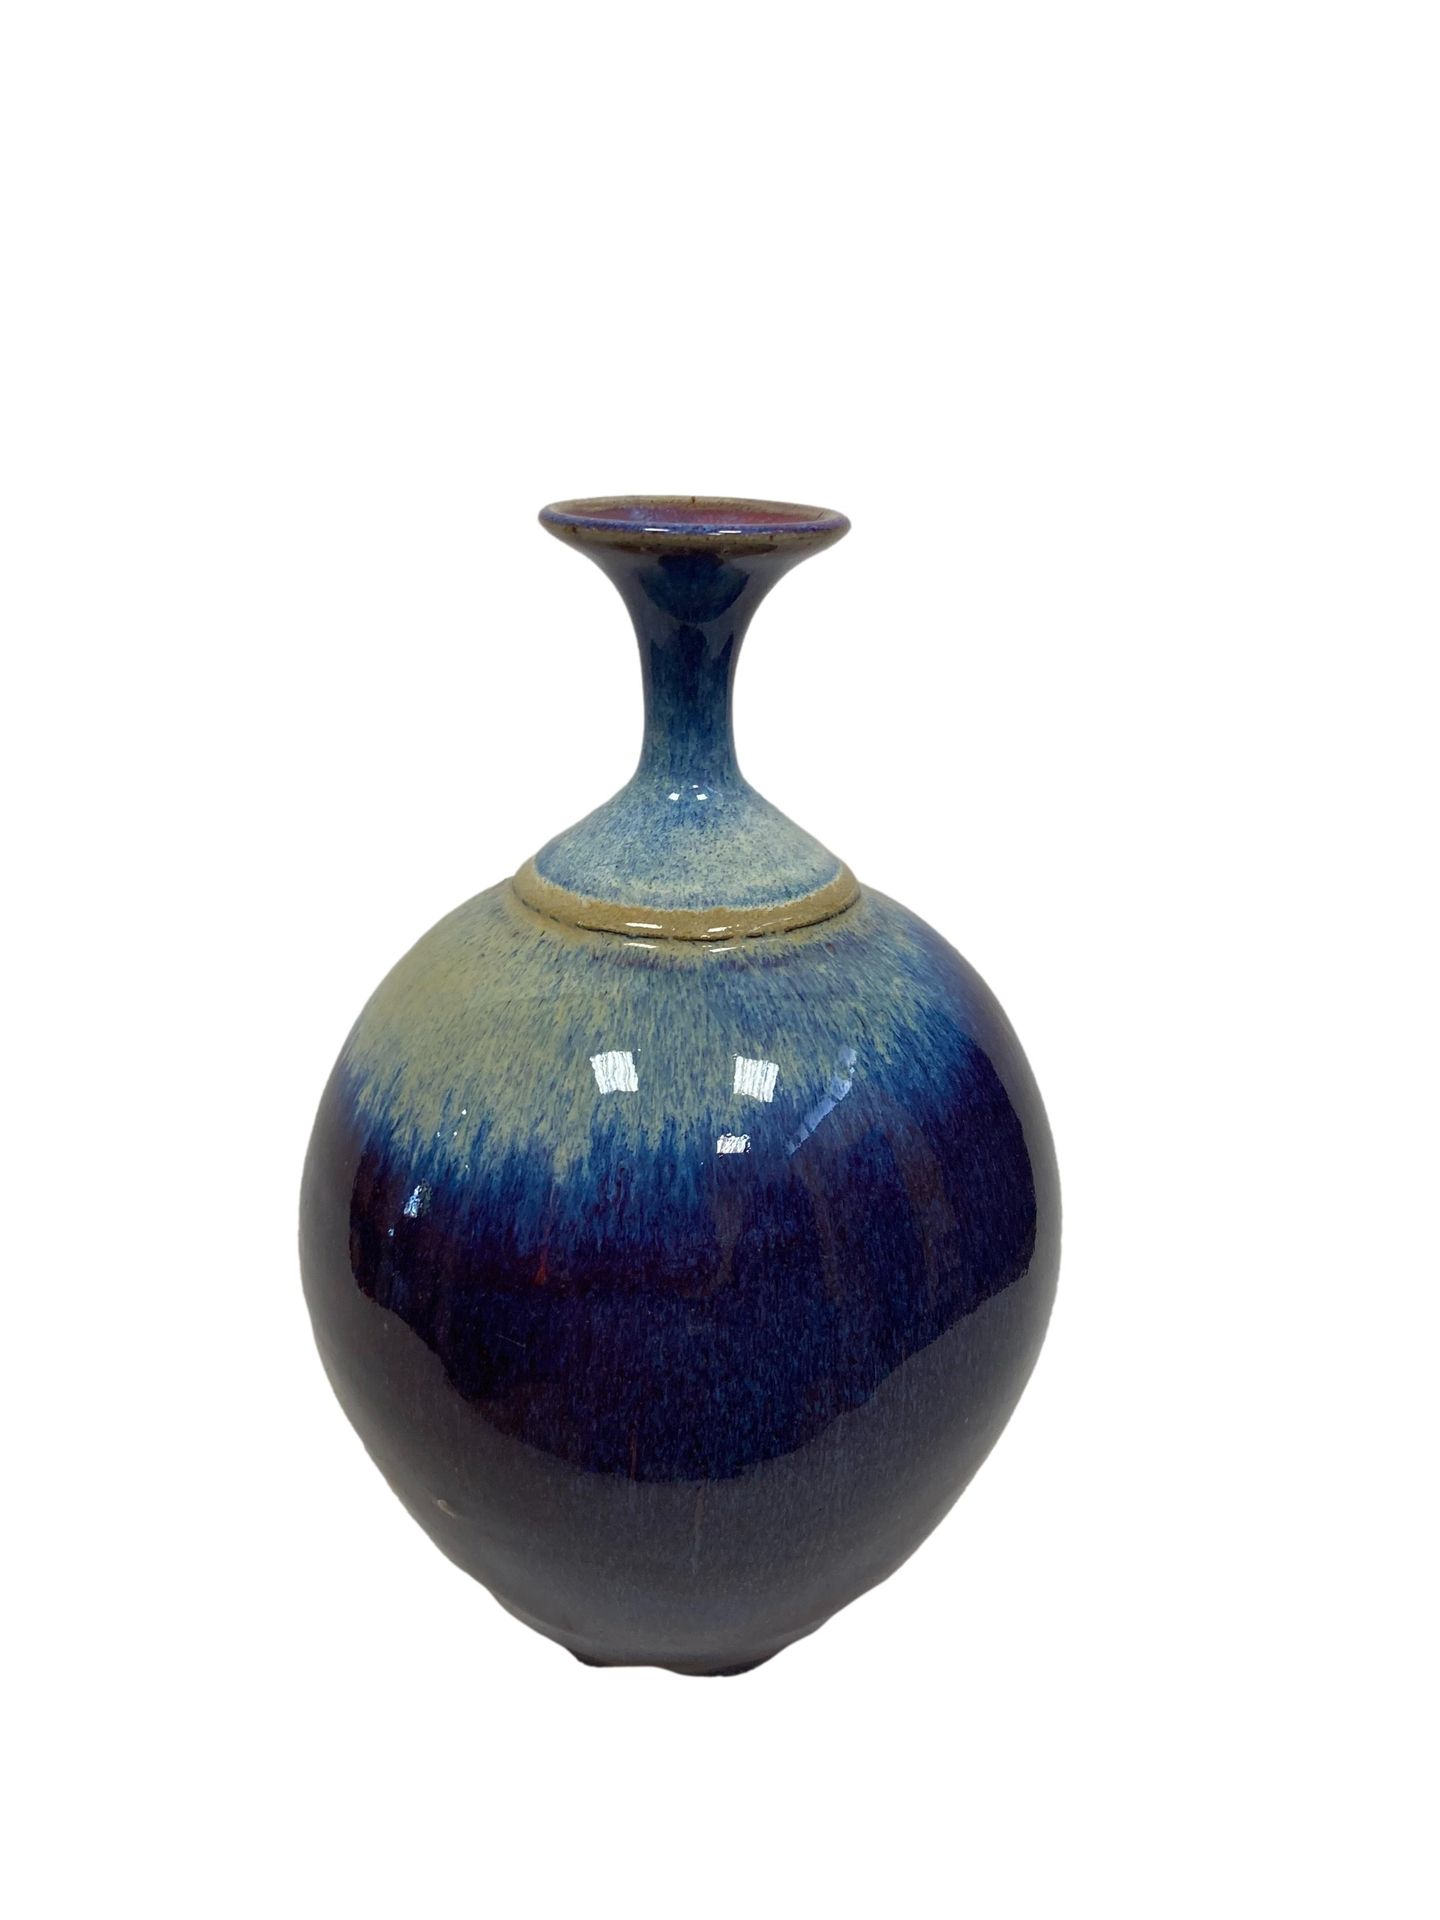 Null NELSON

Glazed ceramic vase with narrow neck decorated with blue and beige &hellip;